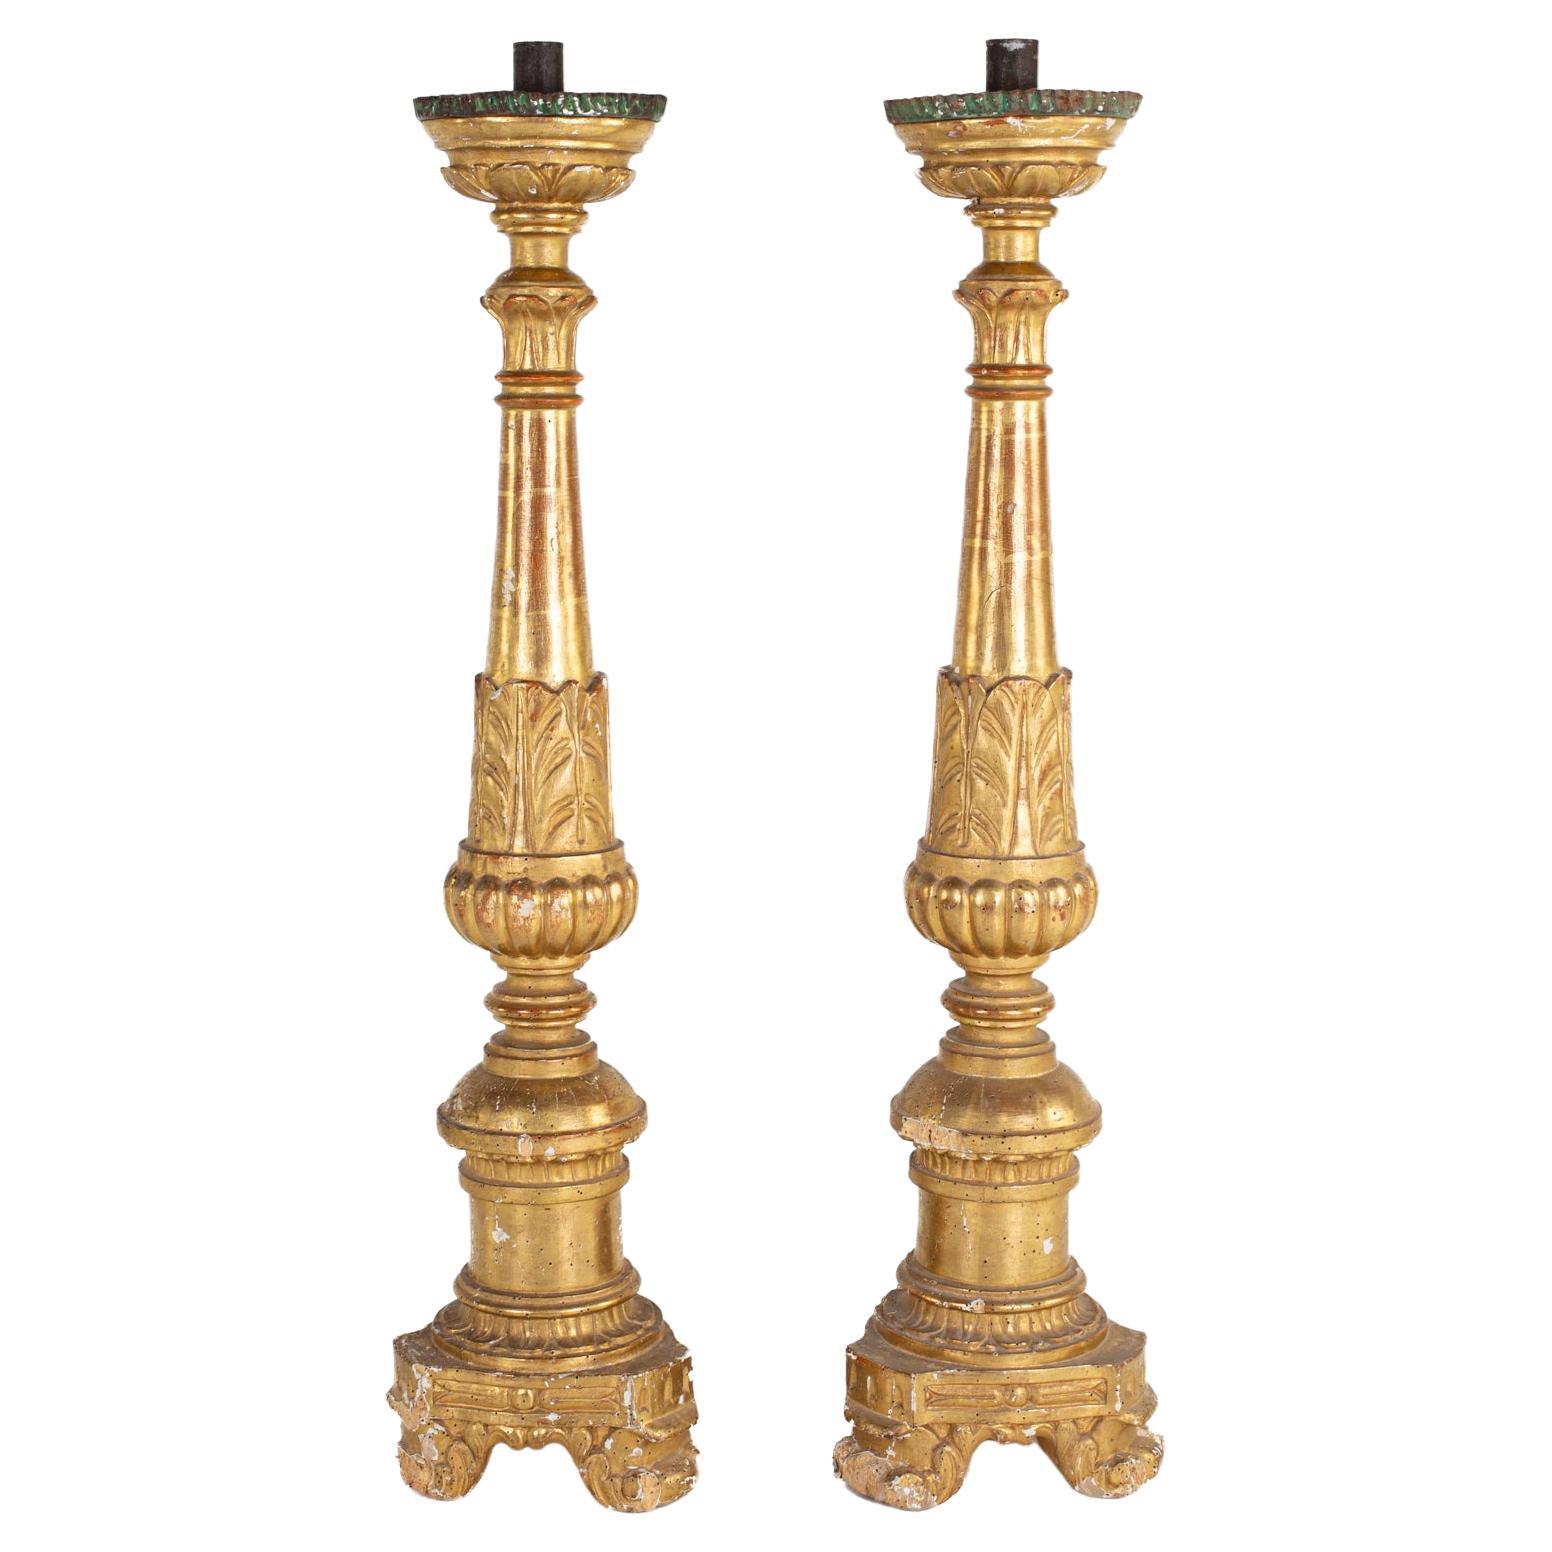 Superb Pair of Finely Carved French Candlesticks